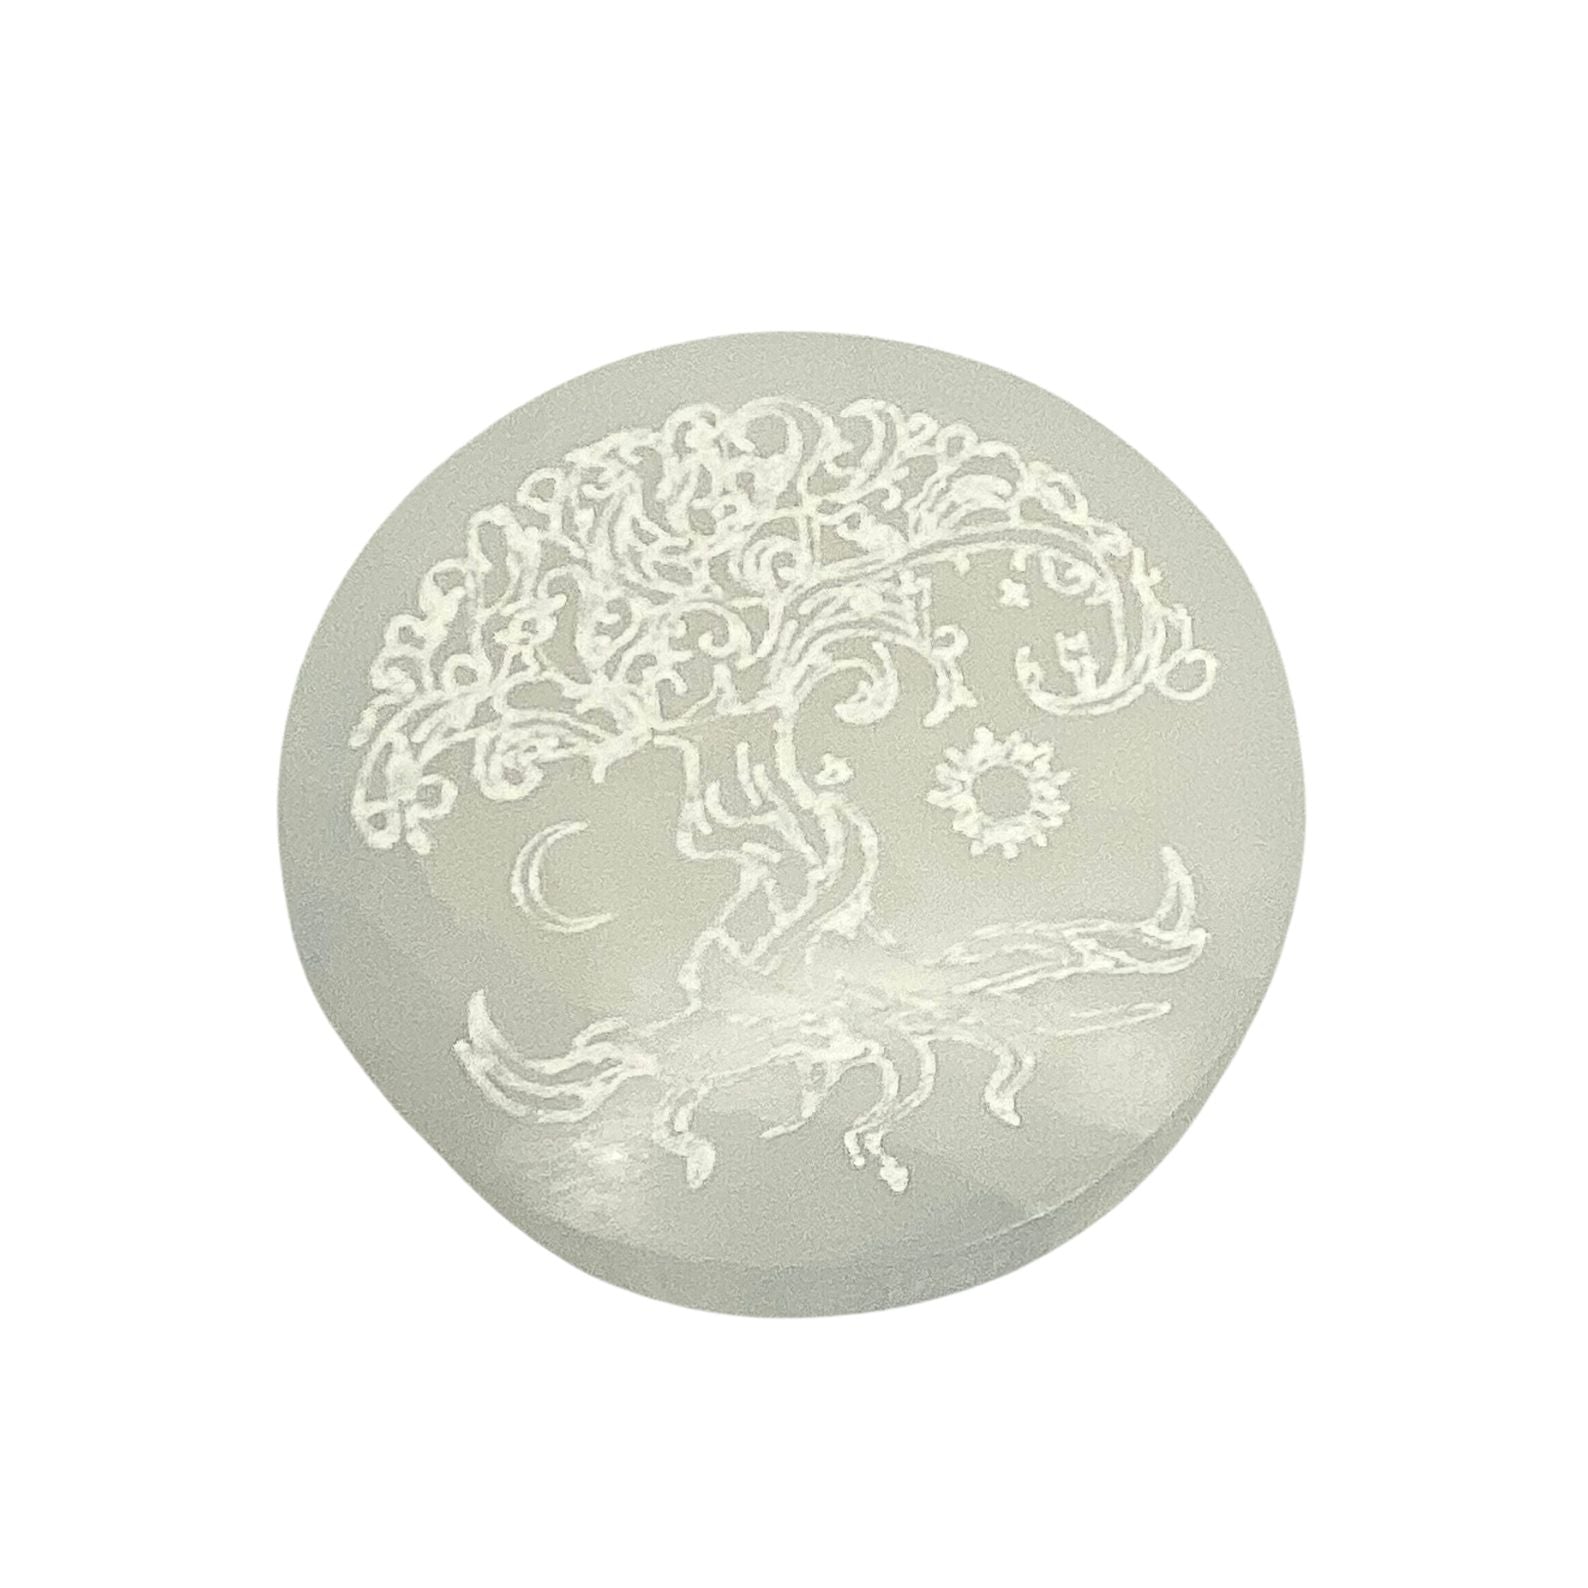 10cm Selenite round engraved charging disc - Tree of life